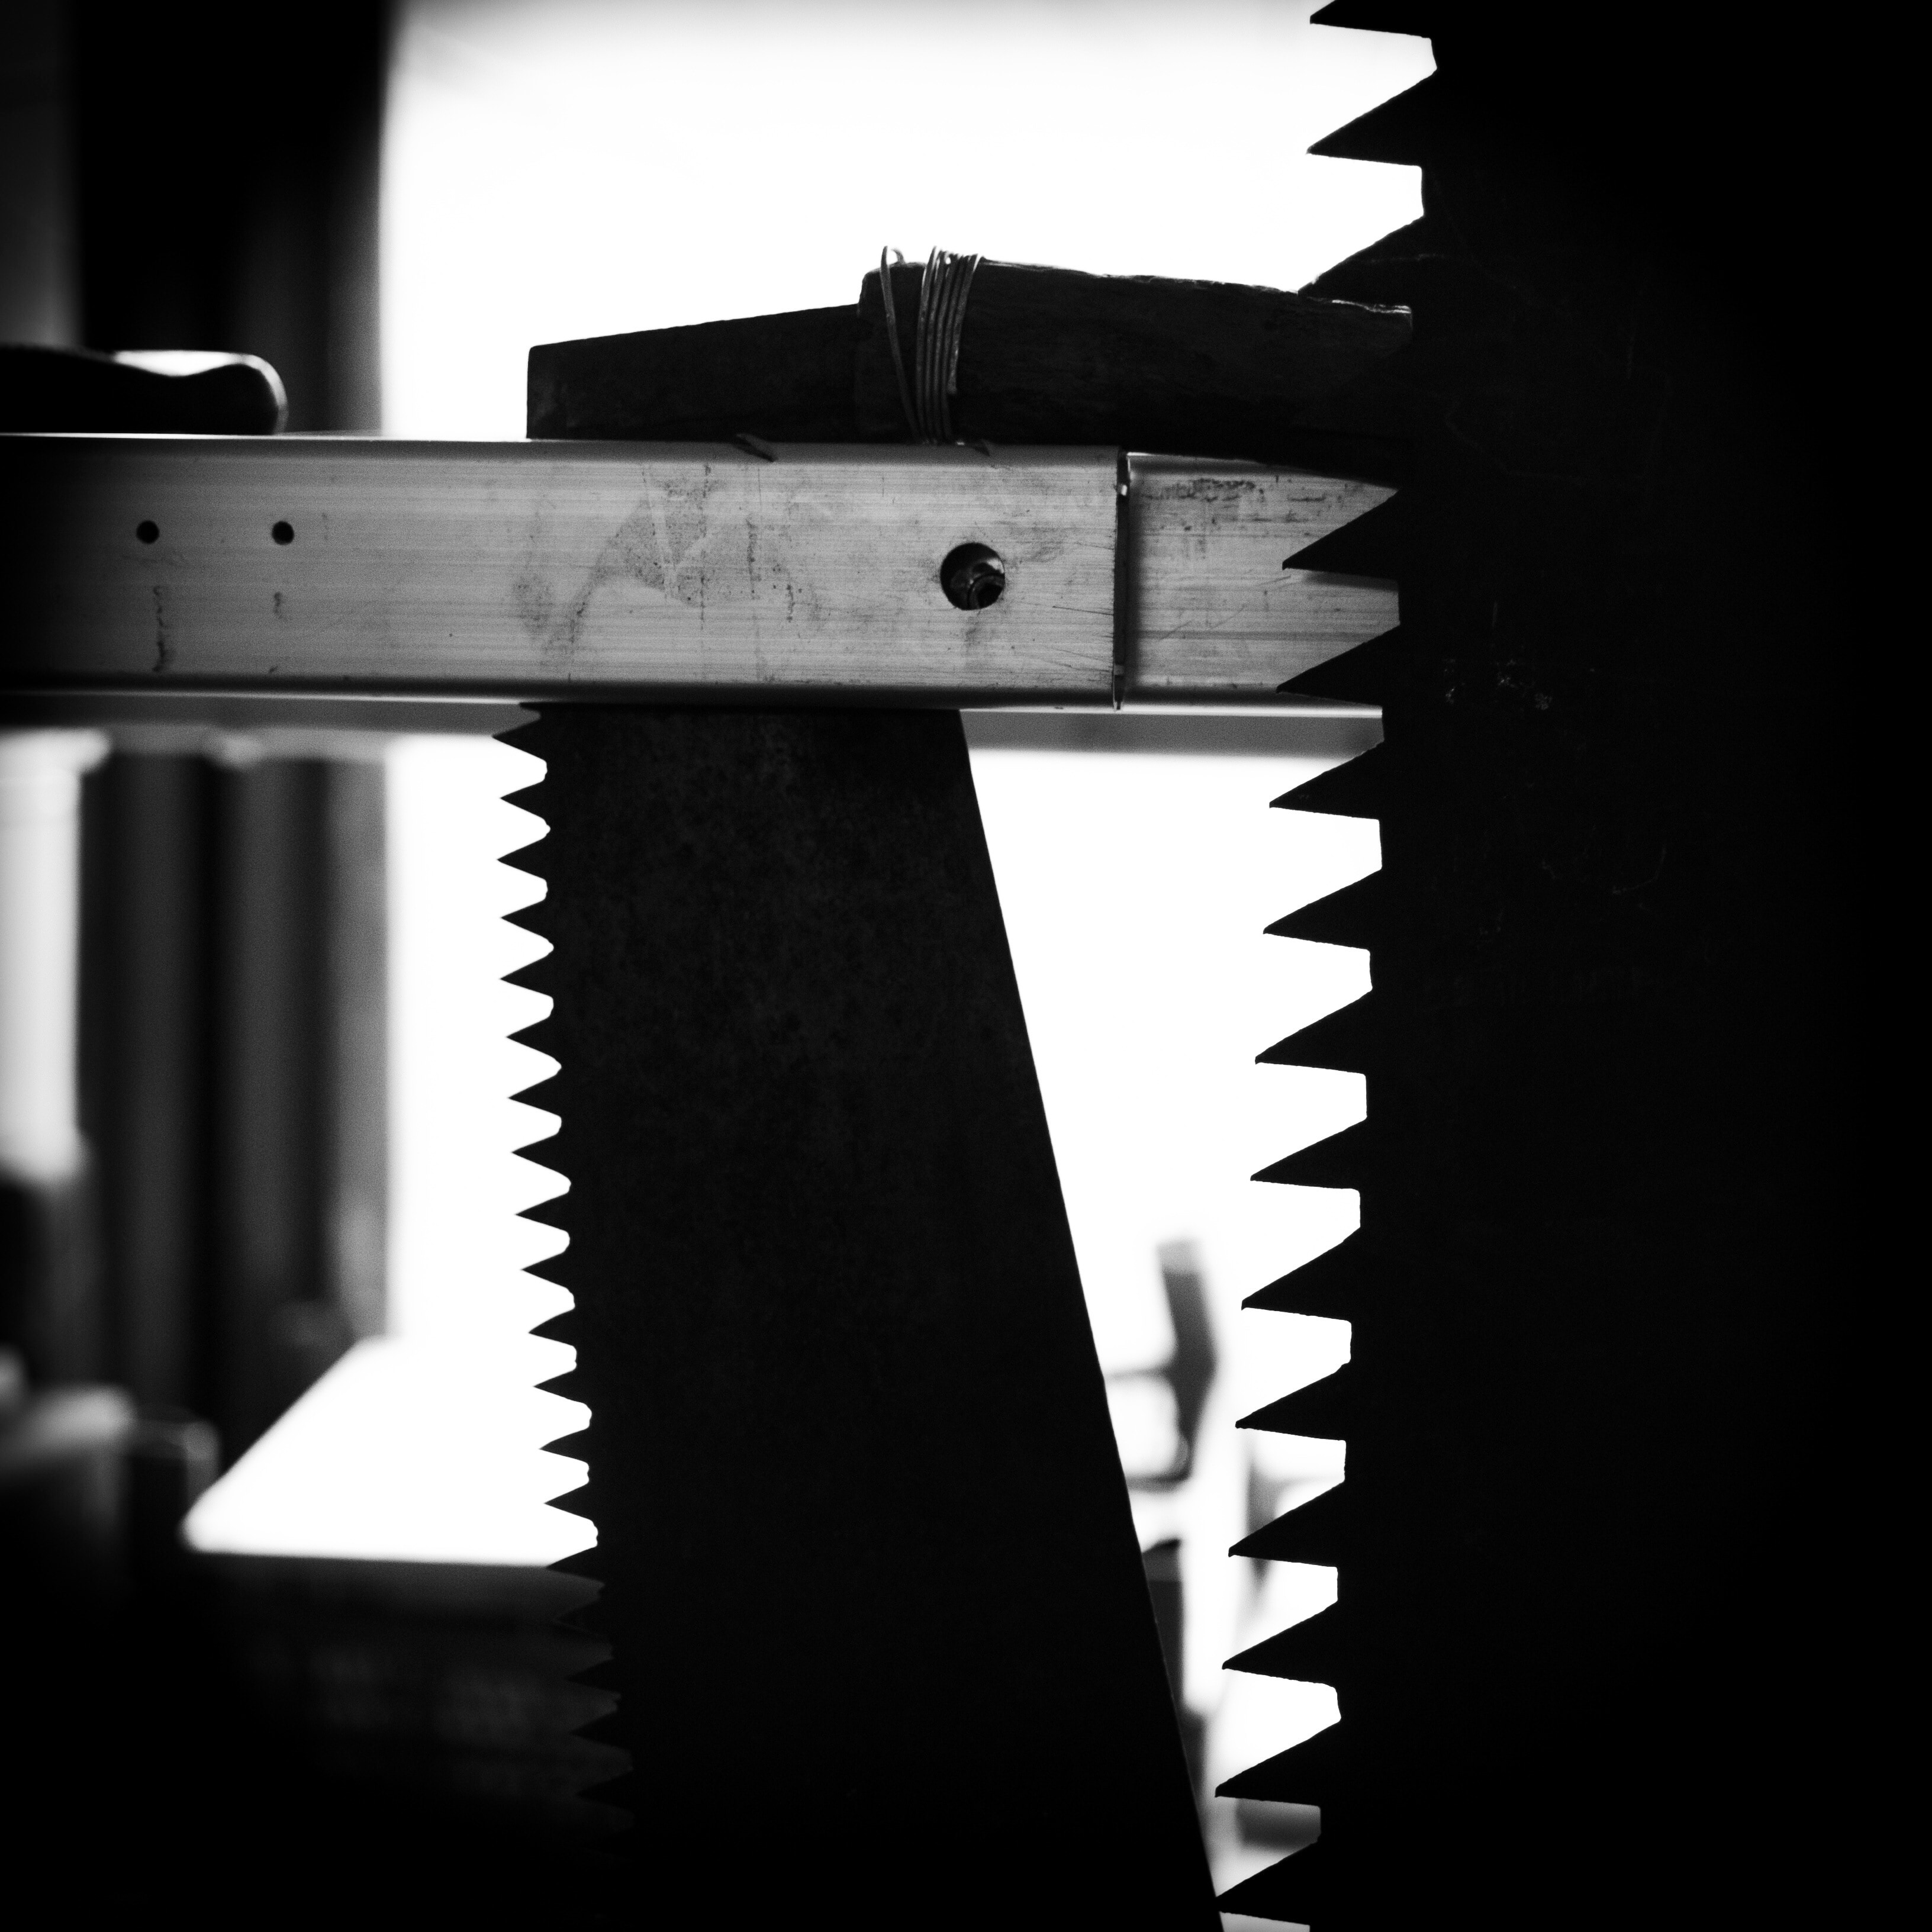 White, Silhouette, Saw, Black, Tool, indoors, close-up